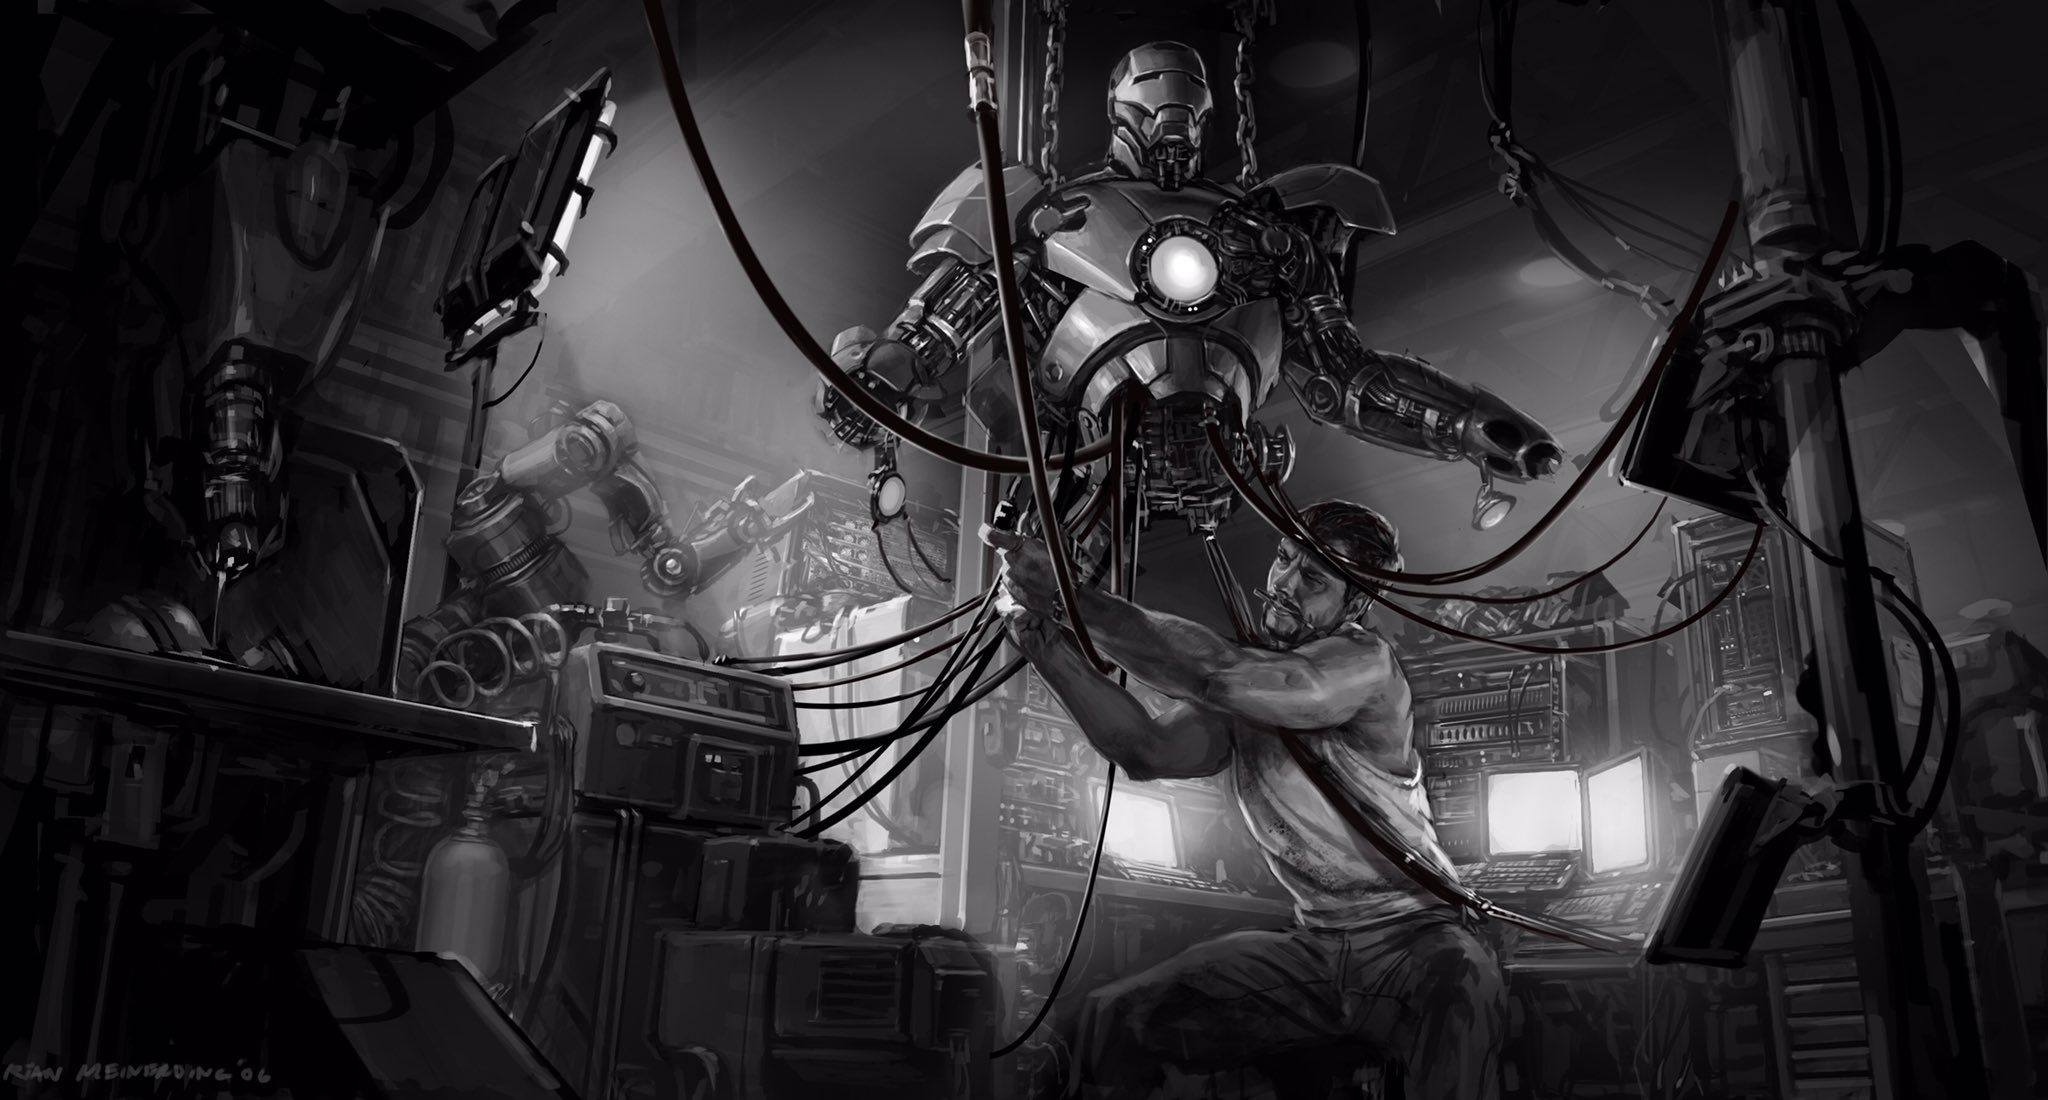 Ryan Meinerding - #tbt to the first #IronMan movie. This is an idea I had for what Tony Stark could be doing in his garage. I've fond memories from this show